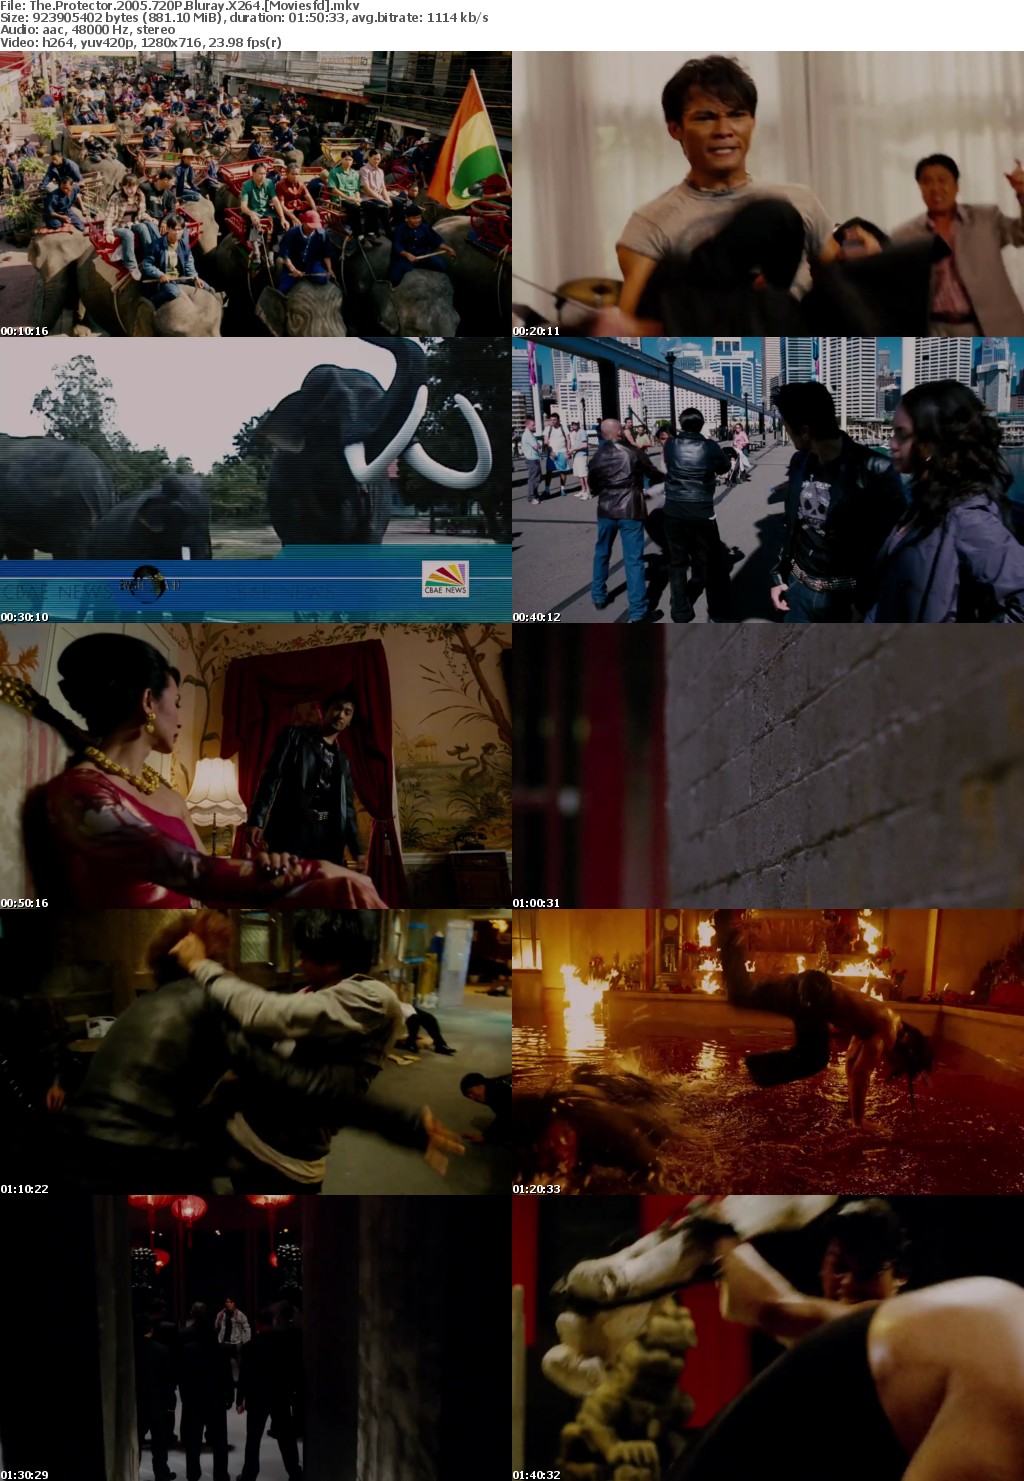 The Protector (2005) 720p BluRay X264 MoviesFD